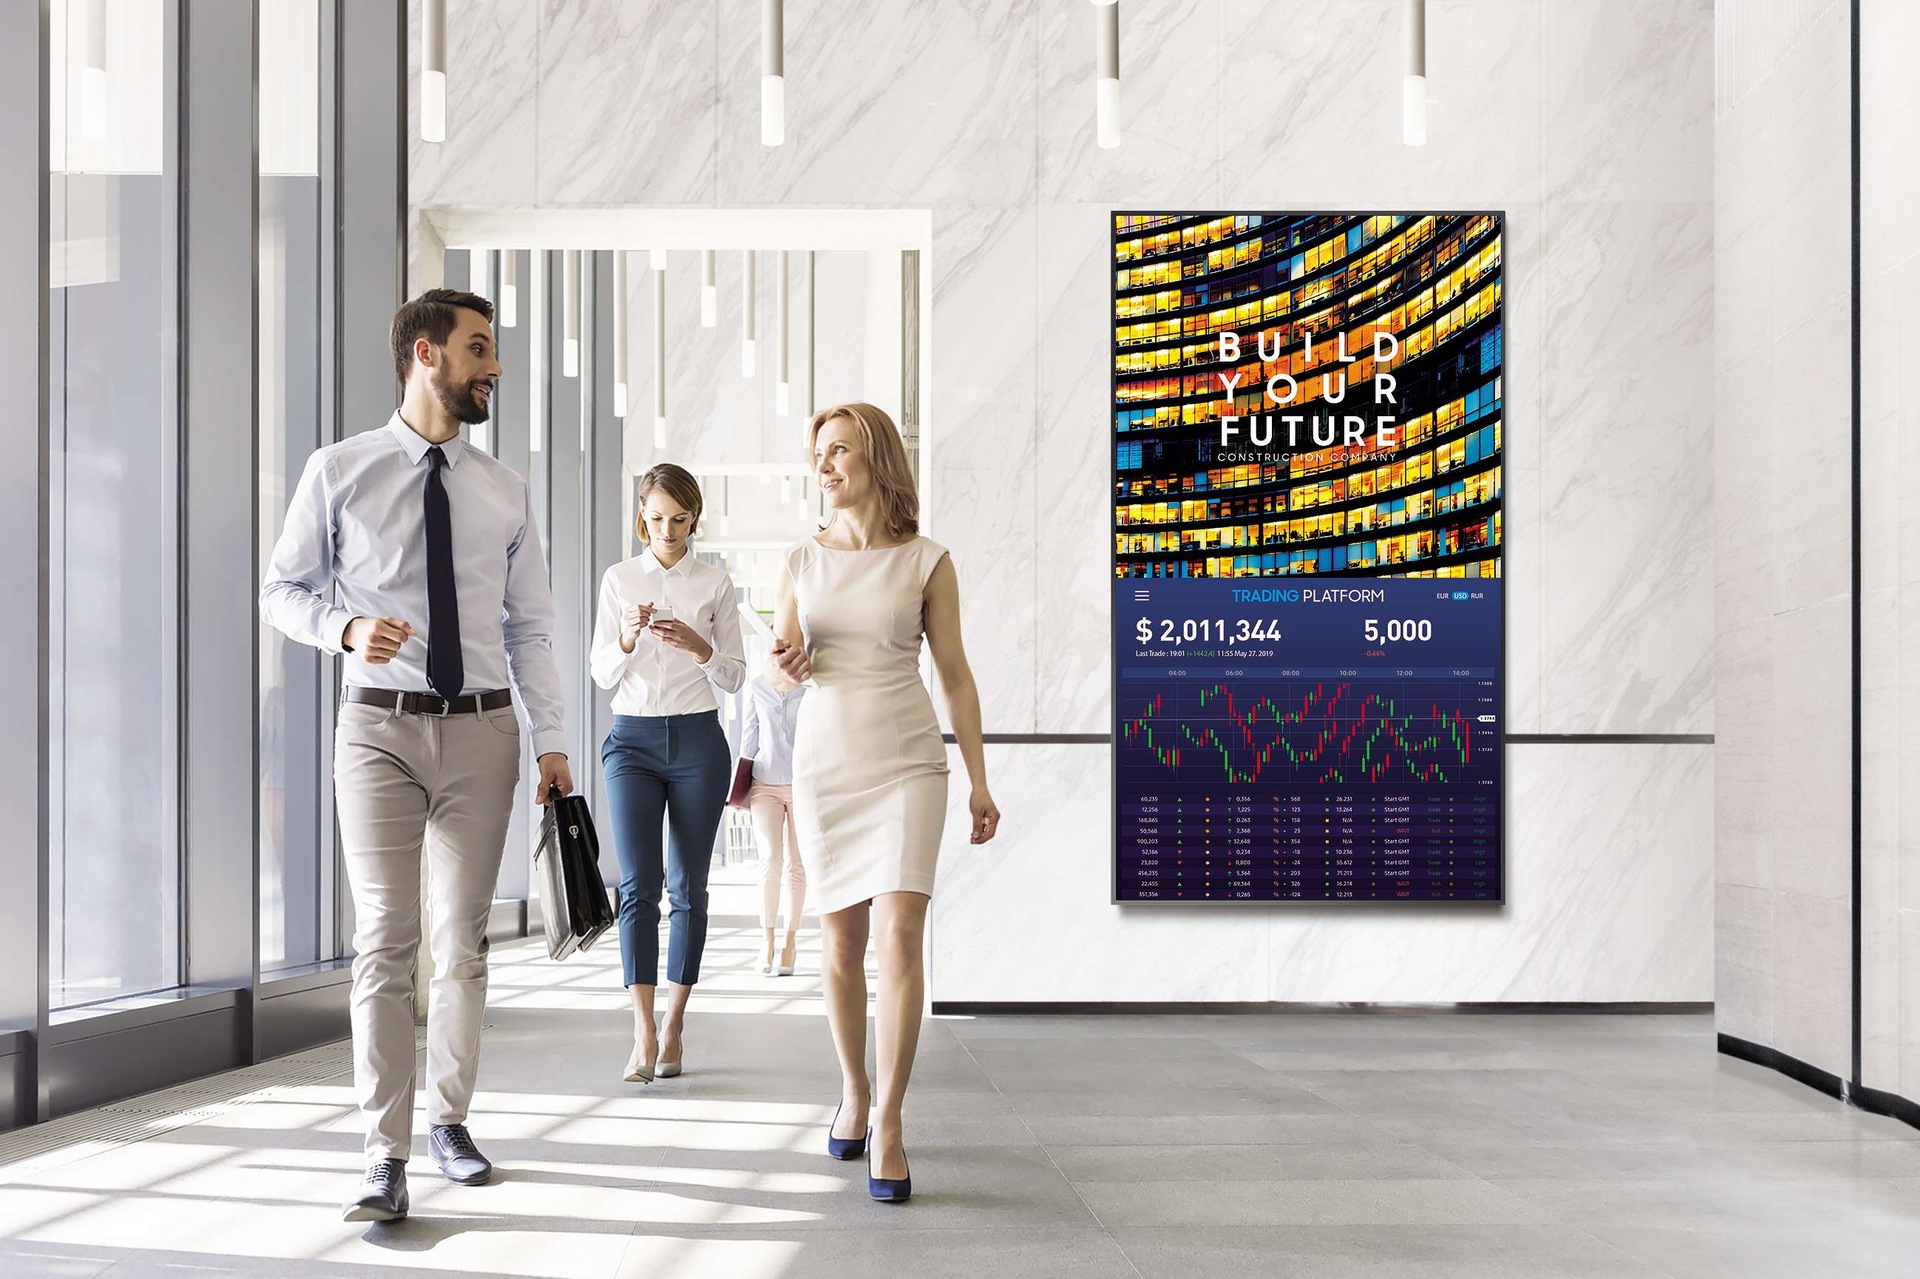 Communicate effectively with a connected display